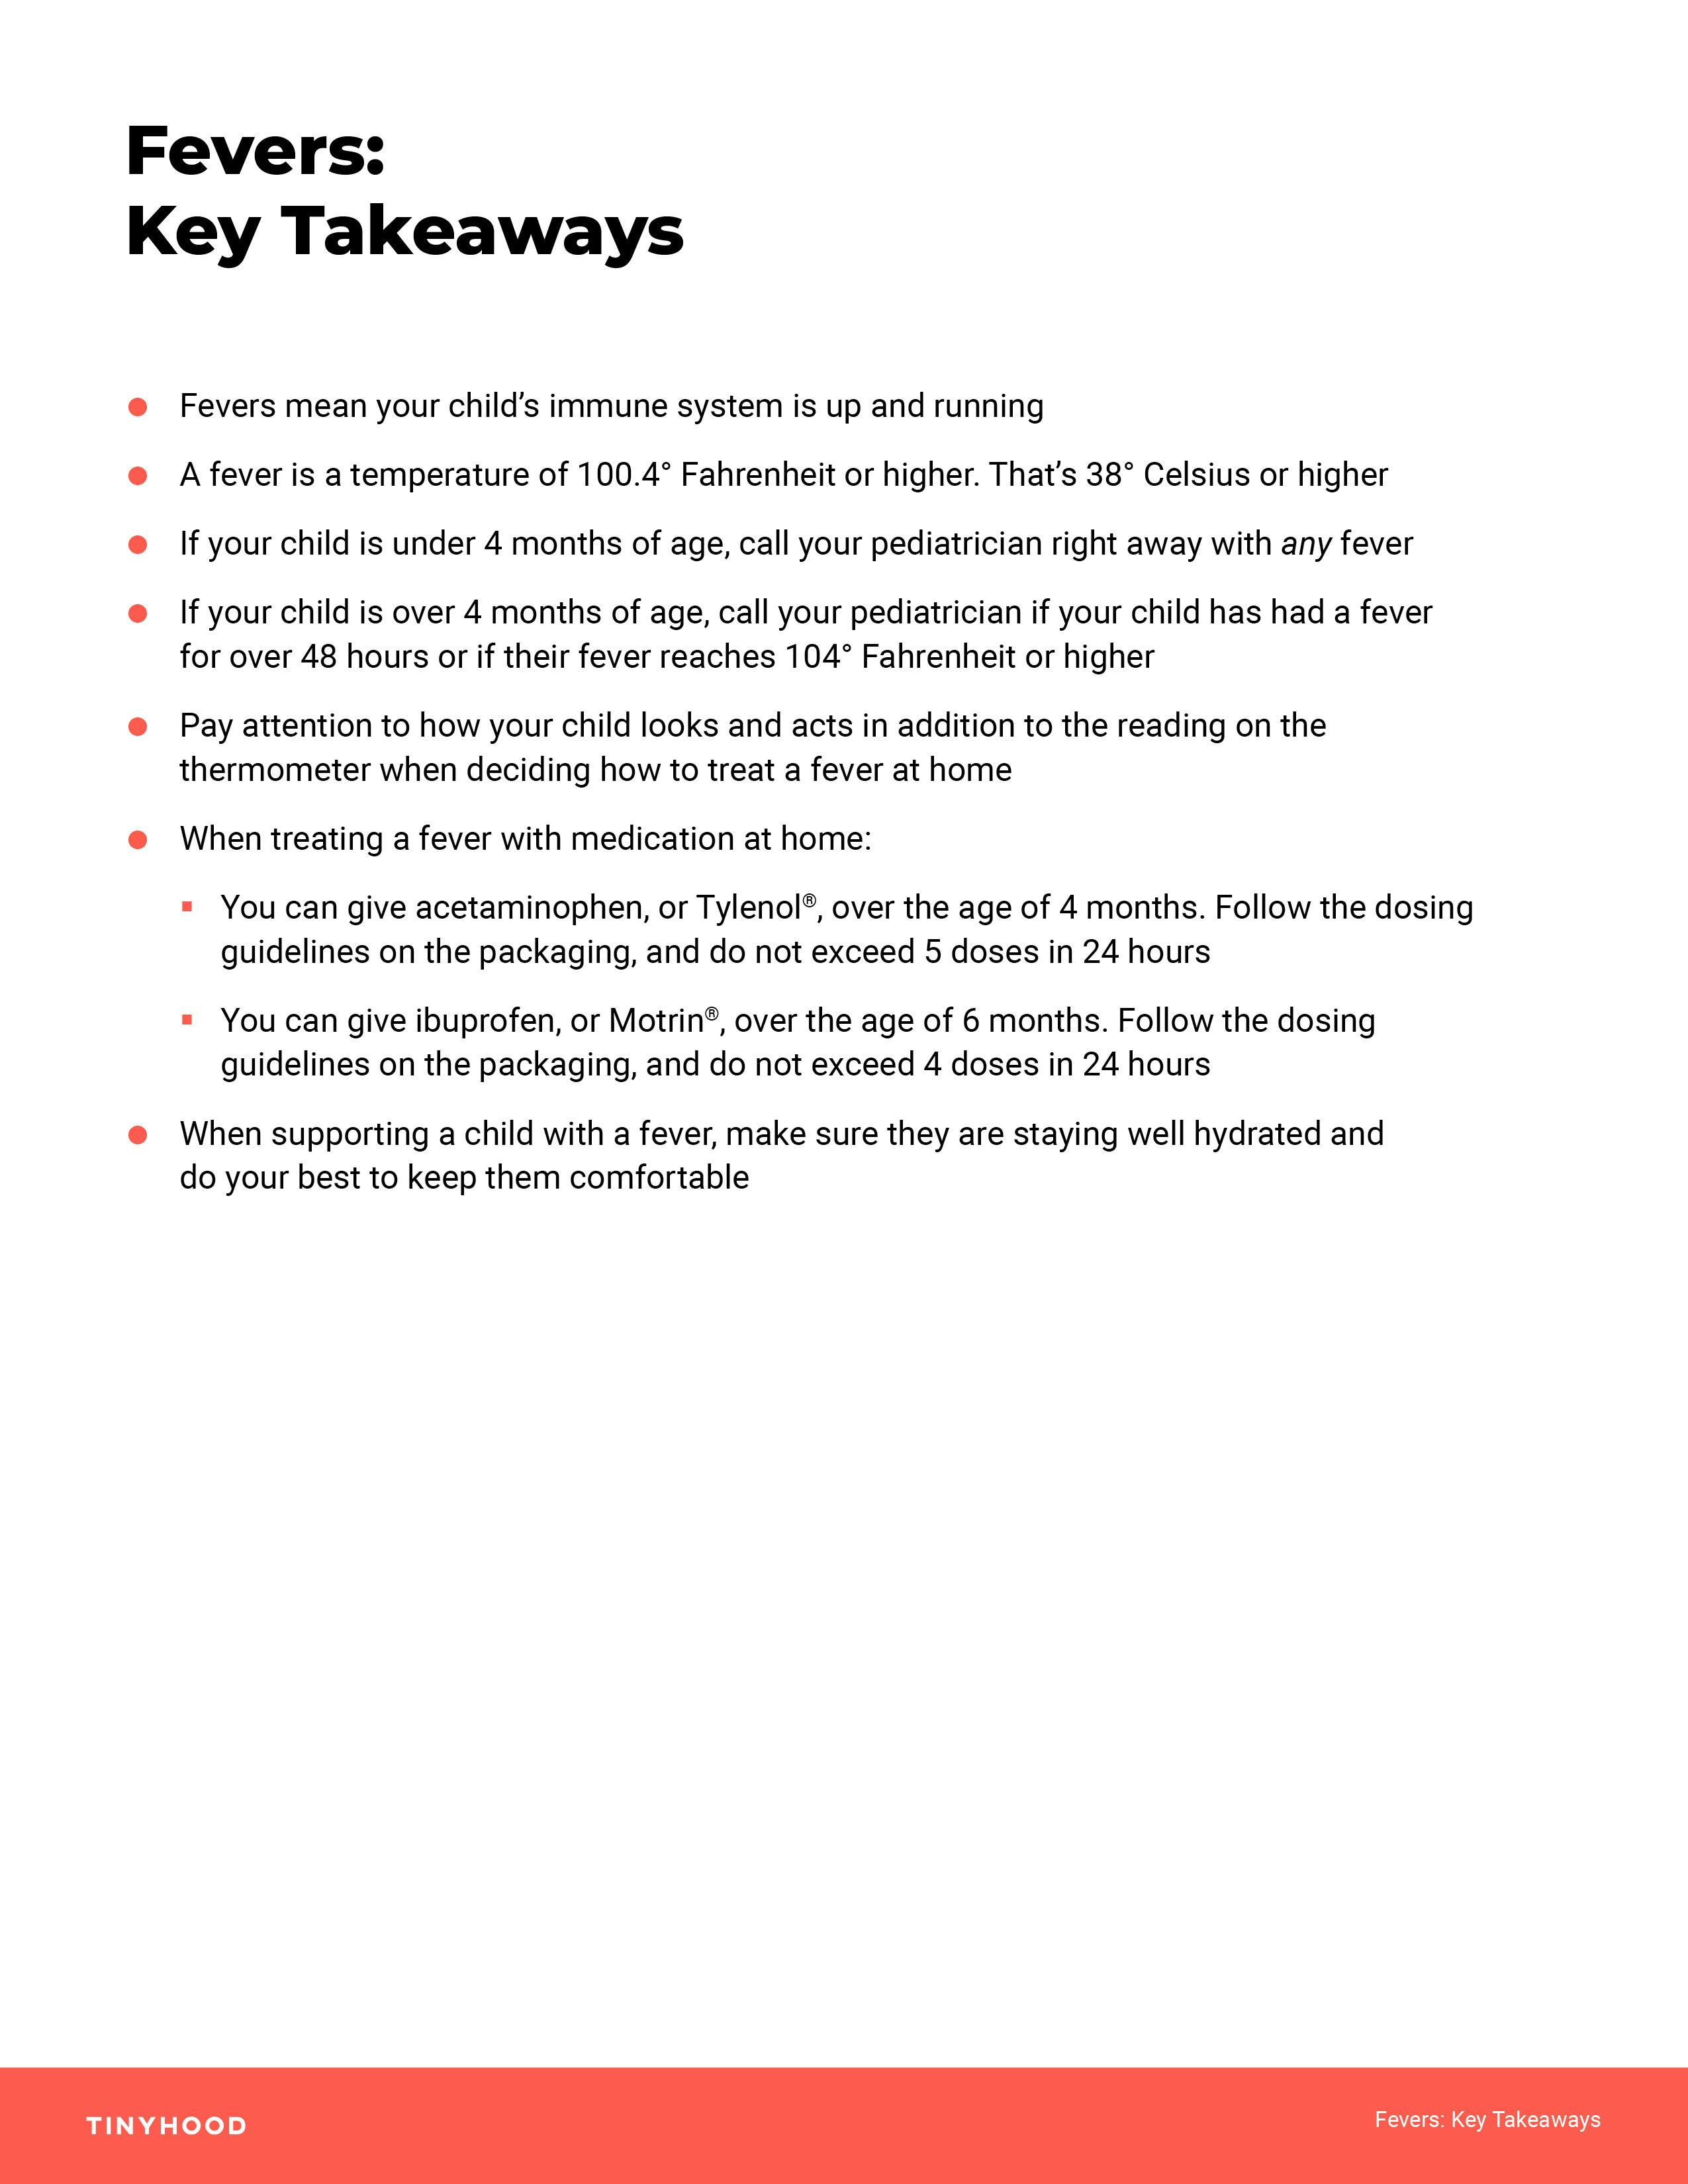 Preview image of Handout: Fevers Key Takeaways